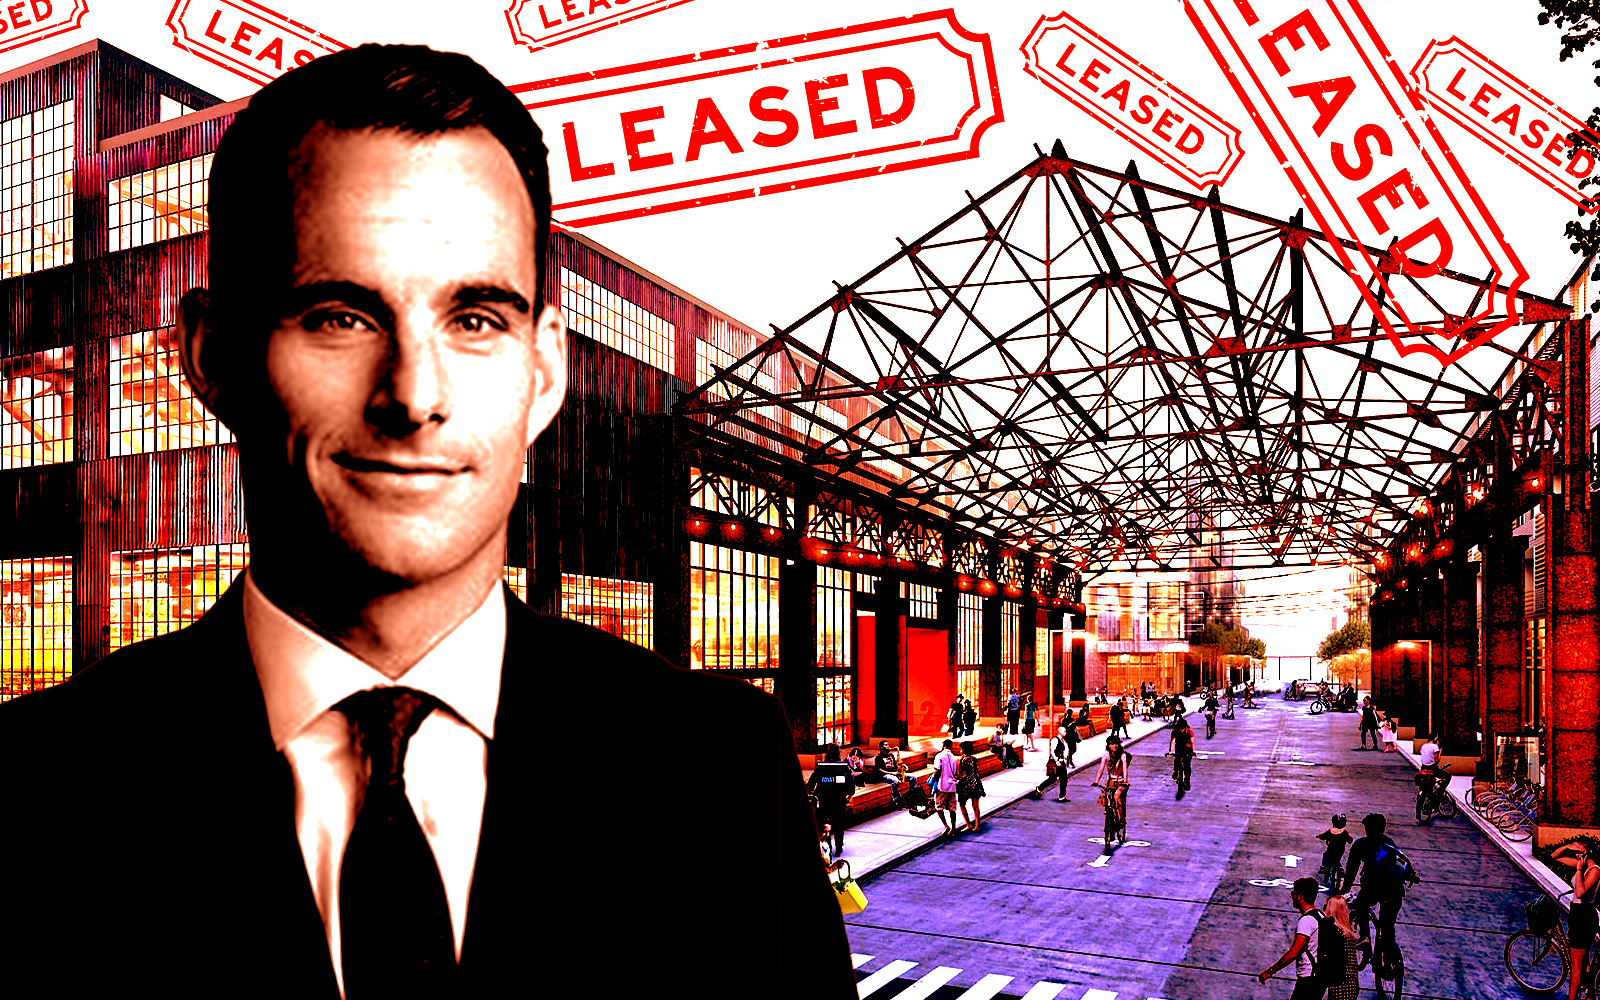 Brookfield leases first seven tenants at Pier 70